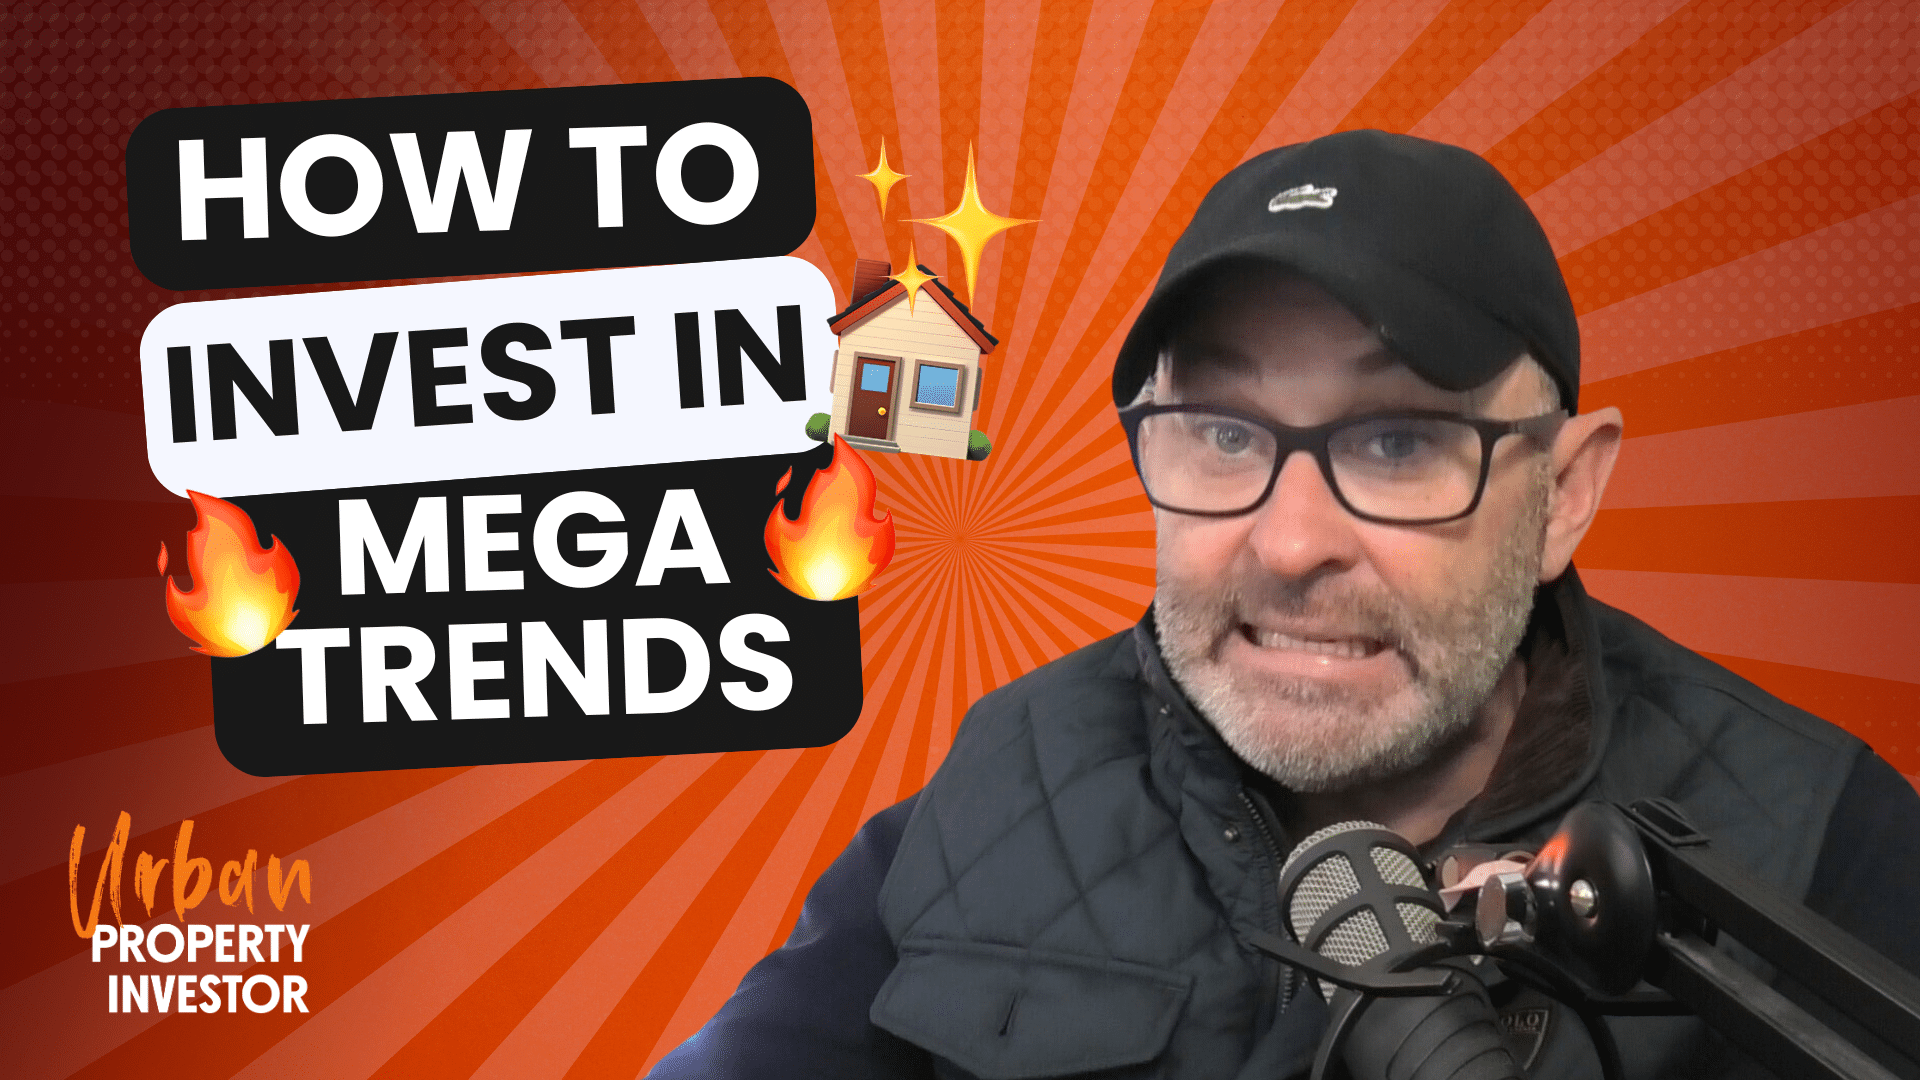 How To Invest In Mega Trends